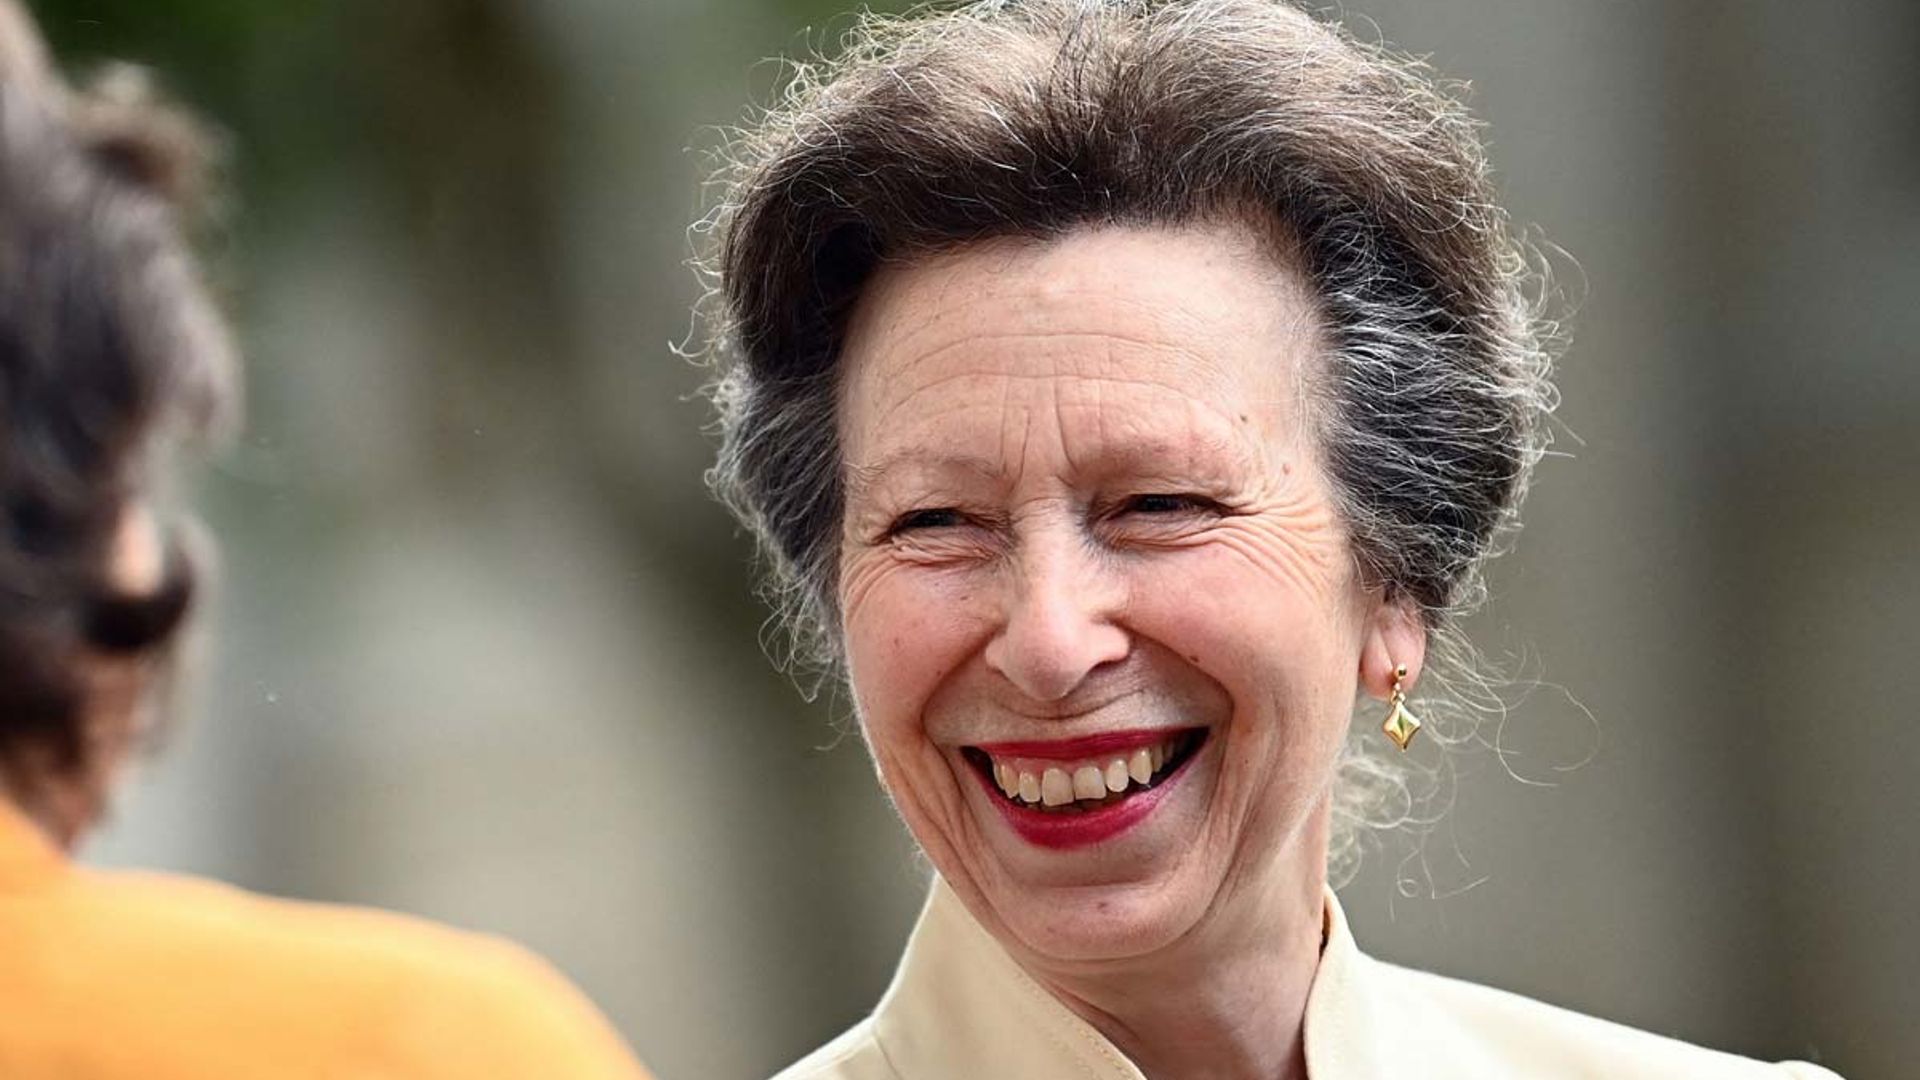 Princess Anne is a timeless style icon in flattering coat and red lipstick